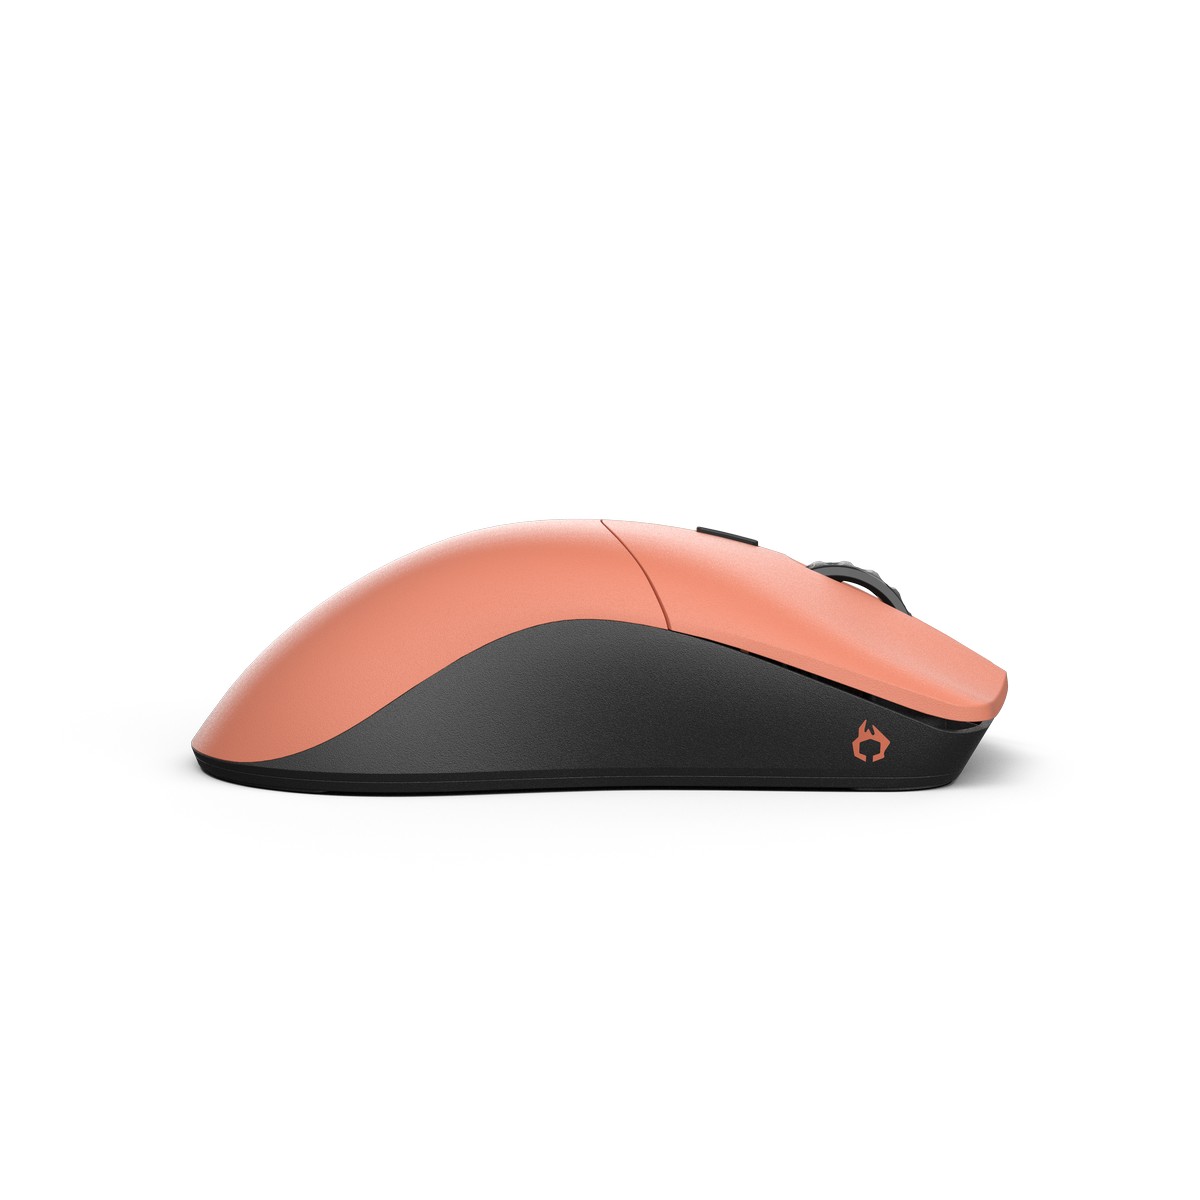 Glorious - Glorious Model O PRO Wireless Optical Gaming Mouse - Red Fox (GLO-MS-OW-RF-FORGE)